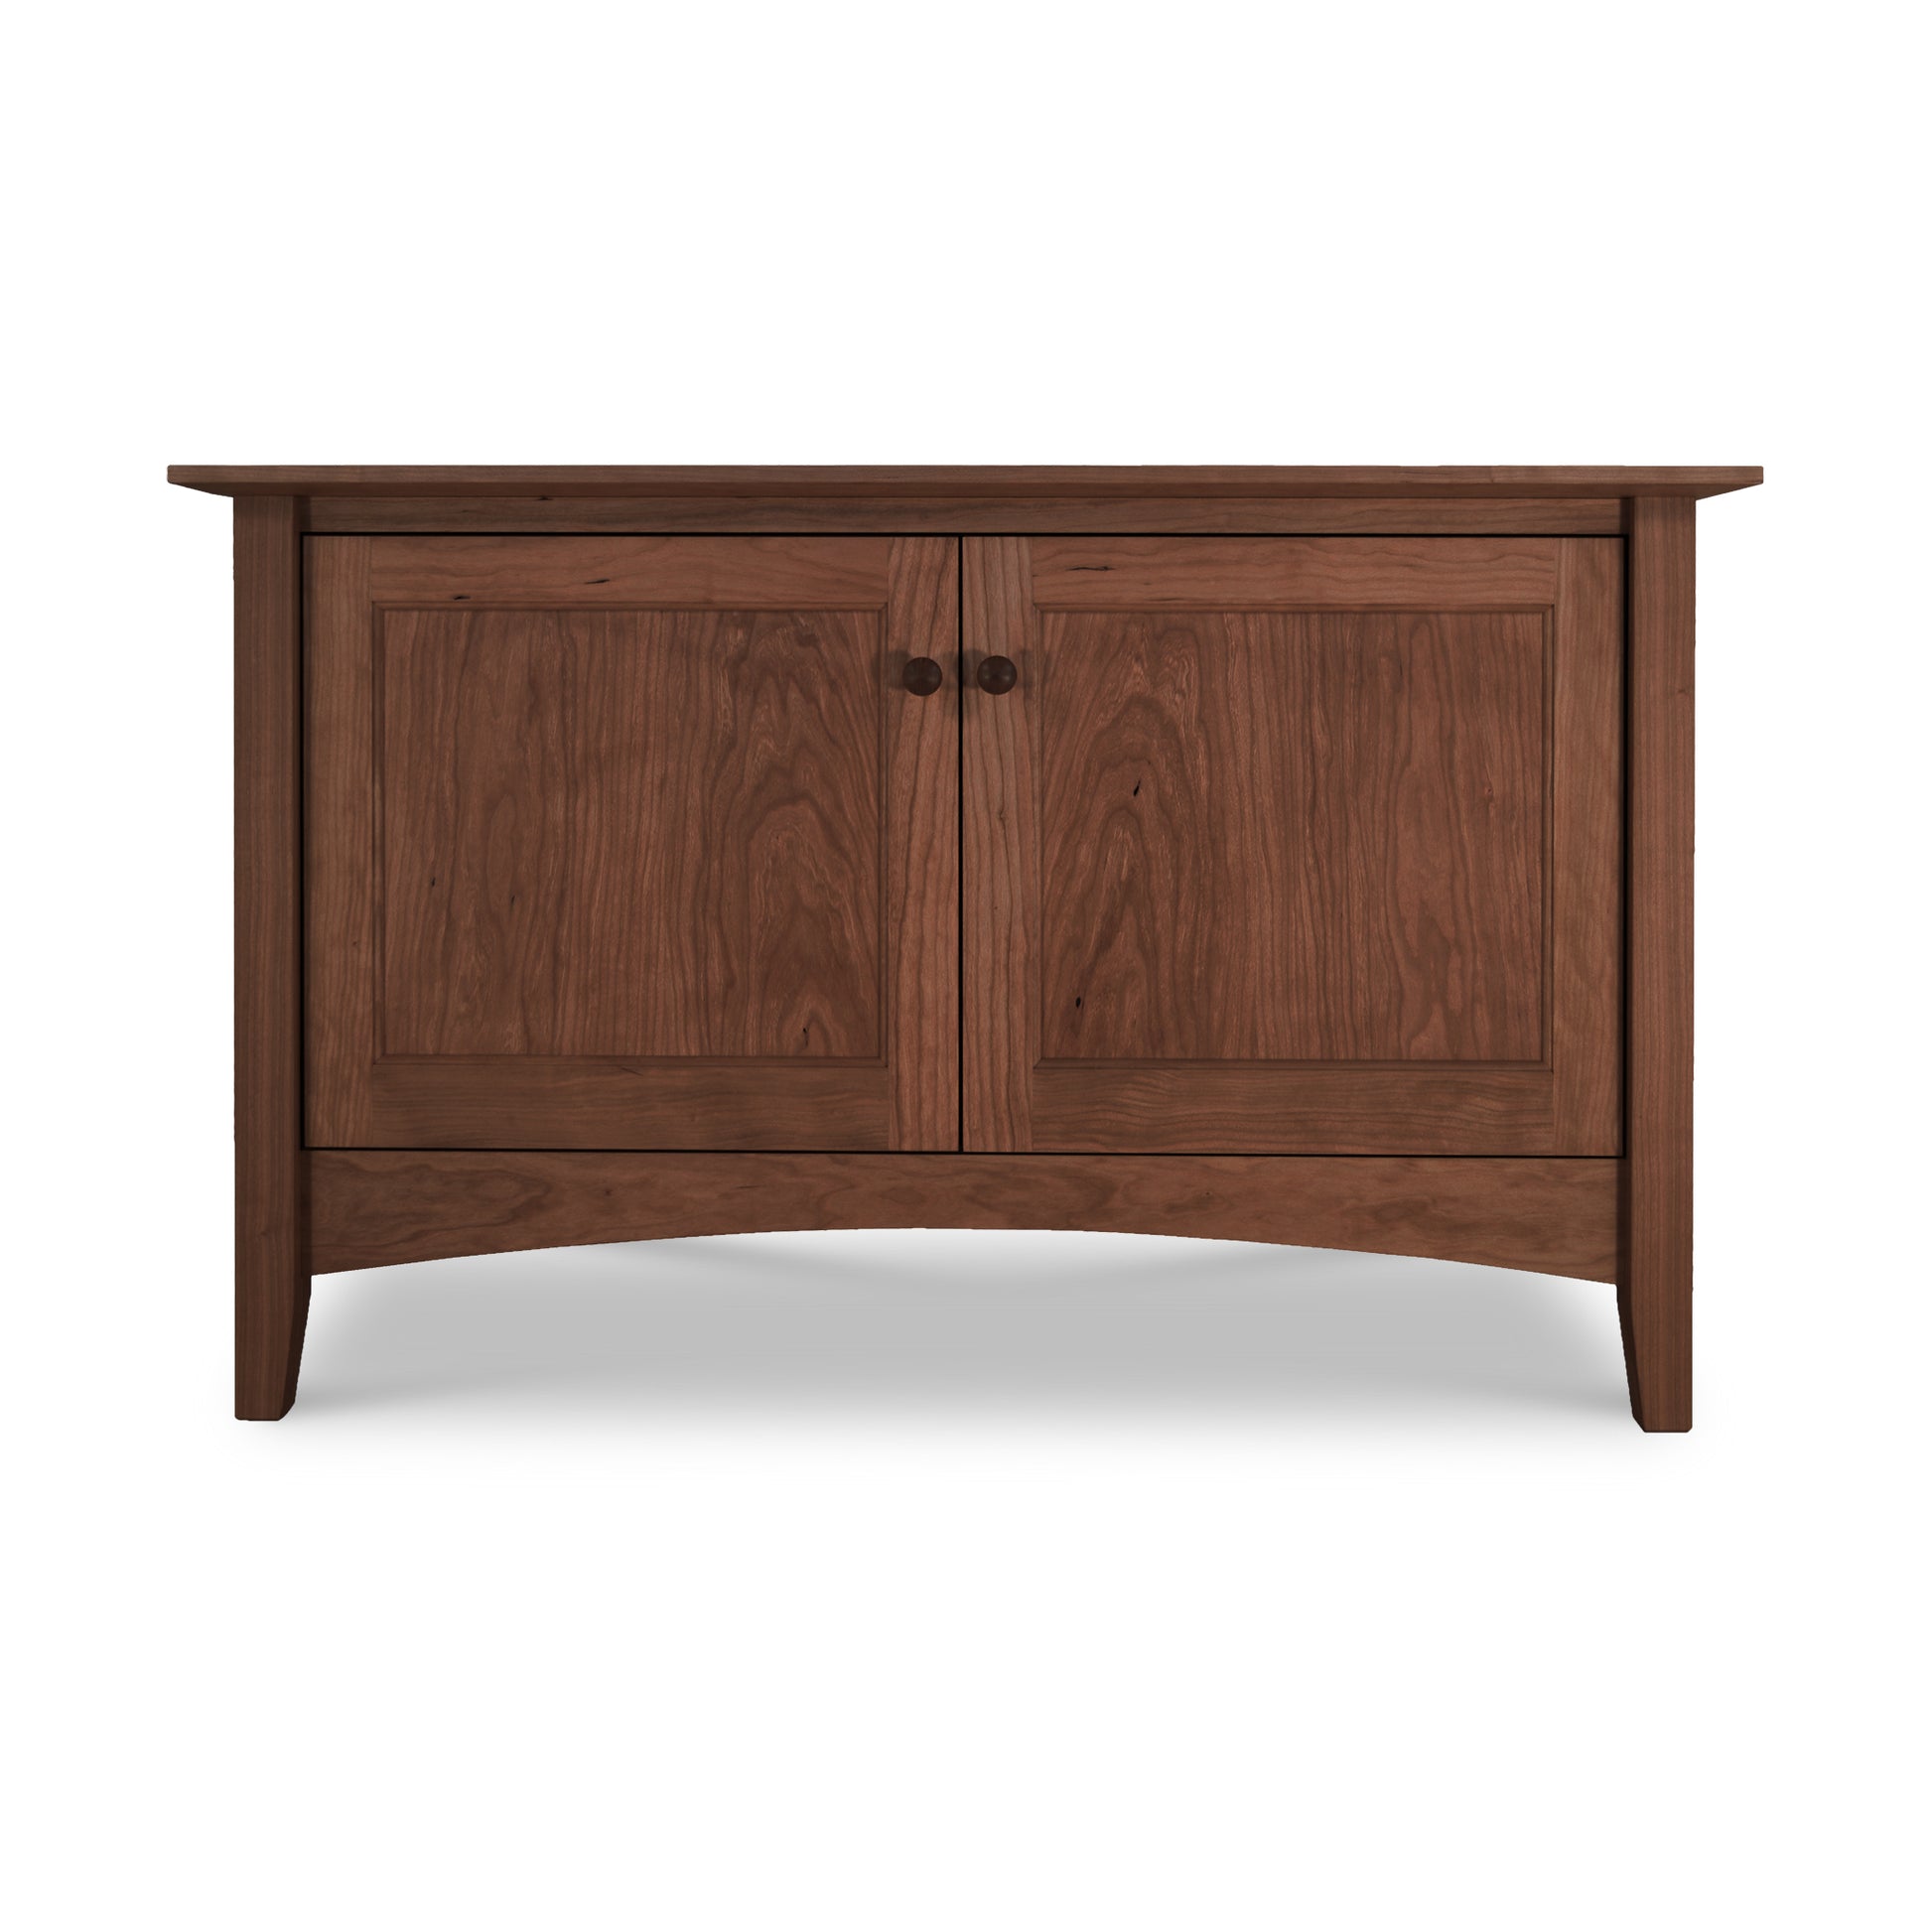 An American Shaker 48" TV Stand in maple wood with two doors and a flat top, featuring a simple and elegant design, set against a white background.